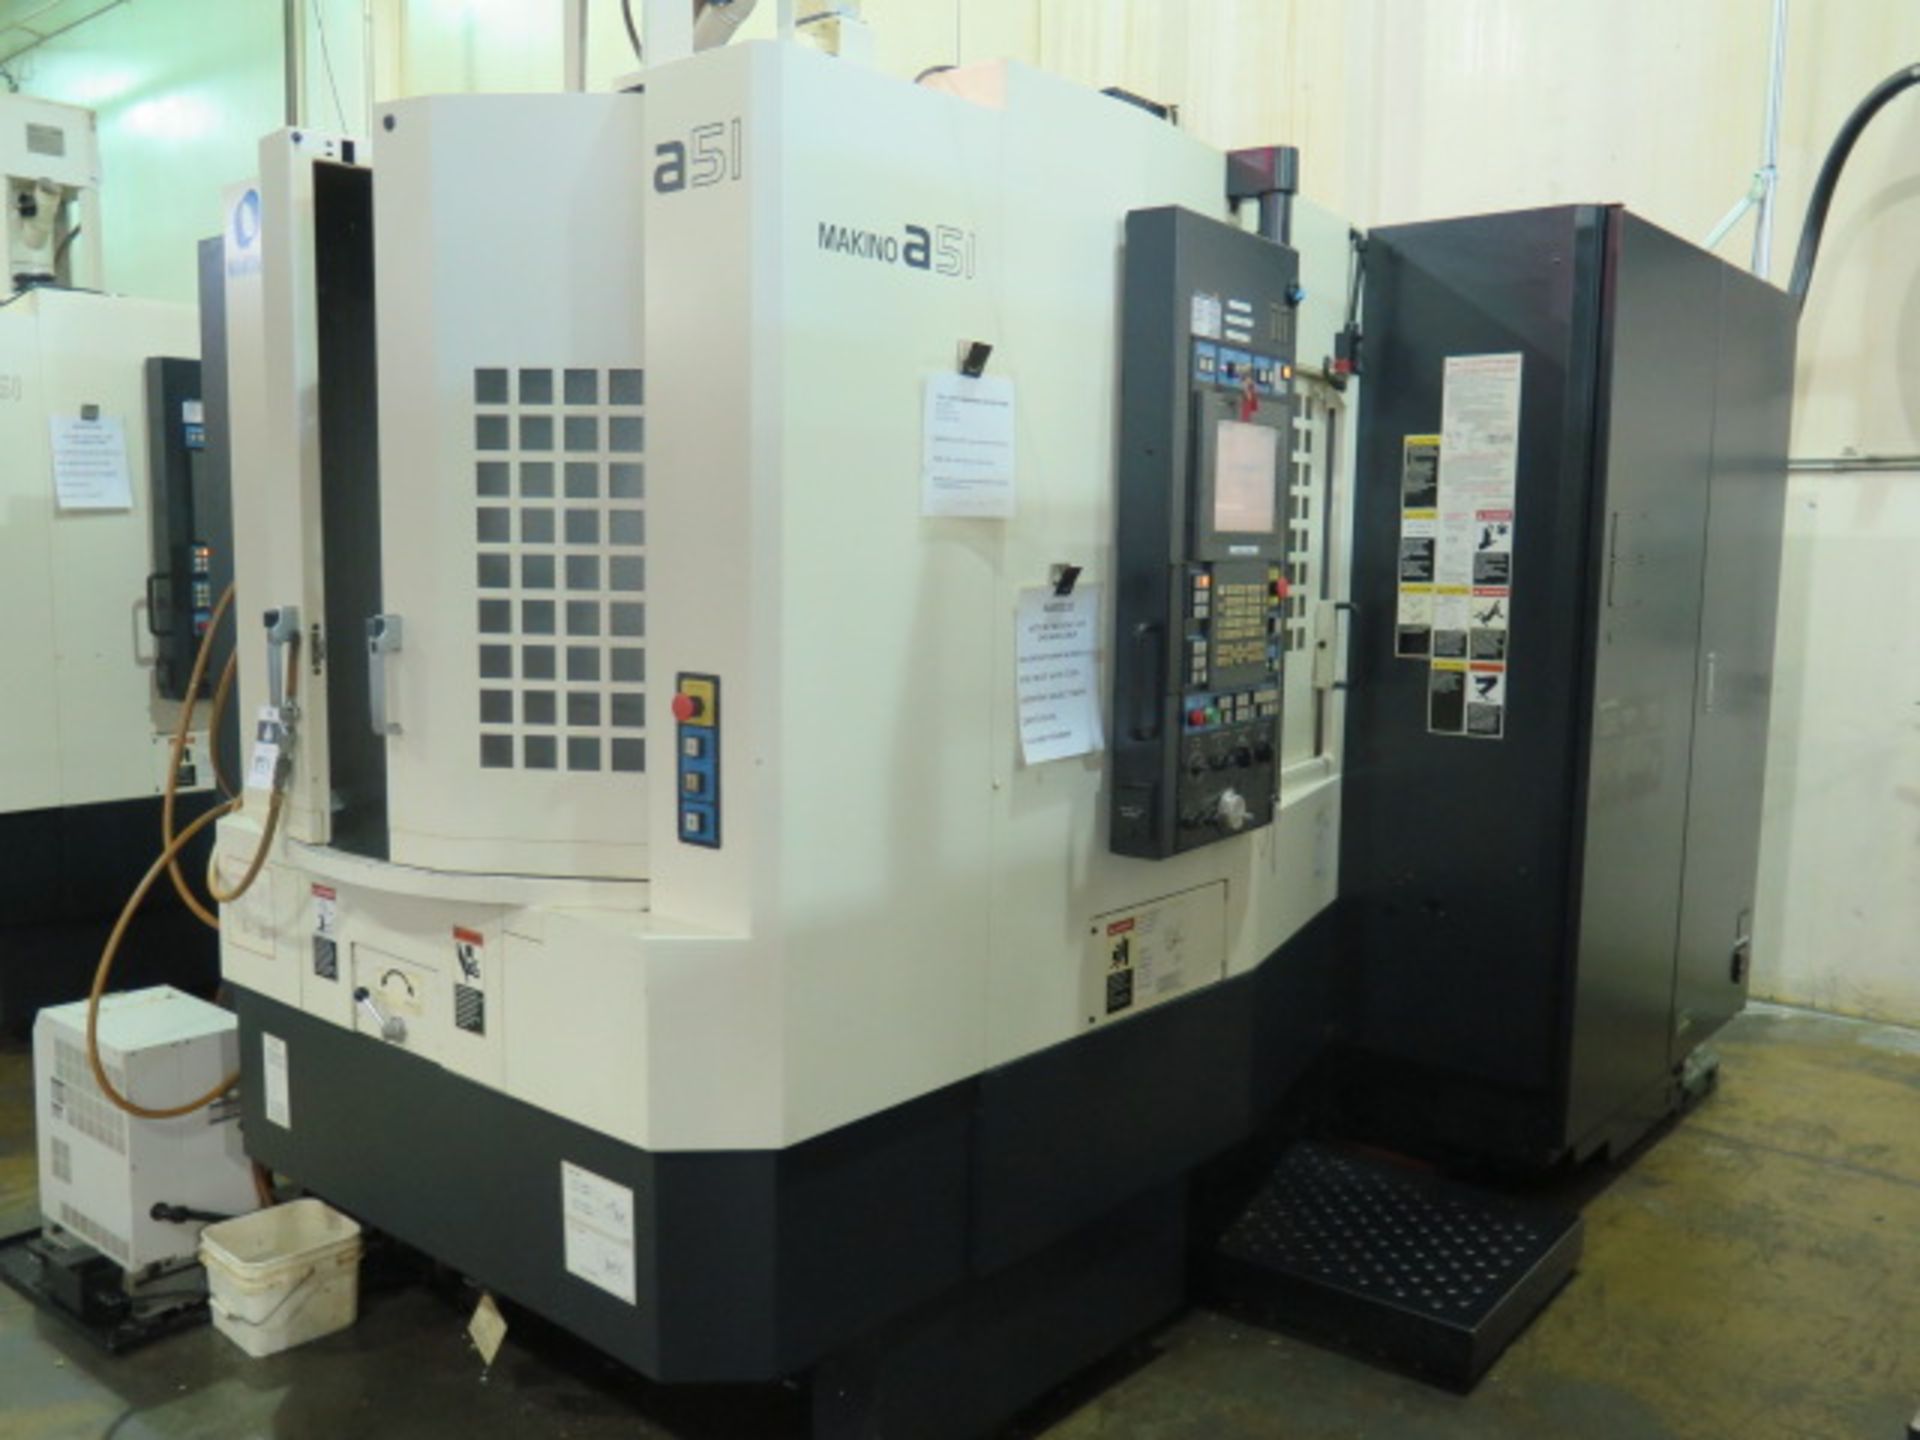 Makino a51 2-Pallet 4-Axis CNC HMC s/n 1615 w/ Makino “Professional 5 Control, SOLD AS IS